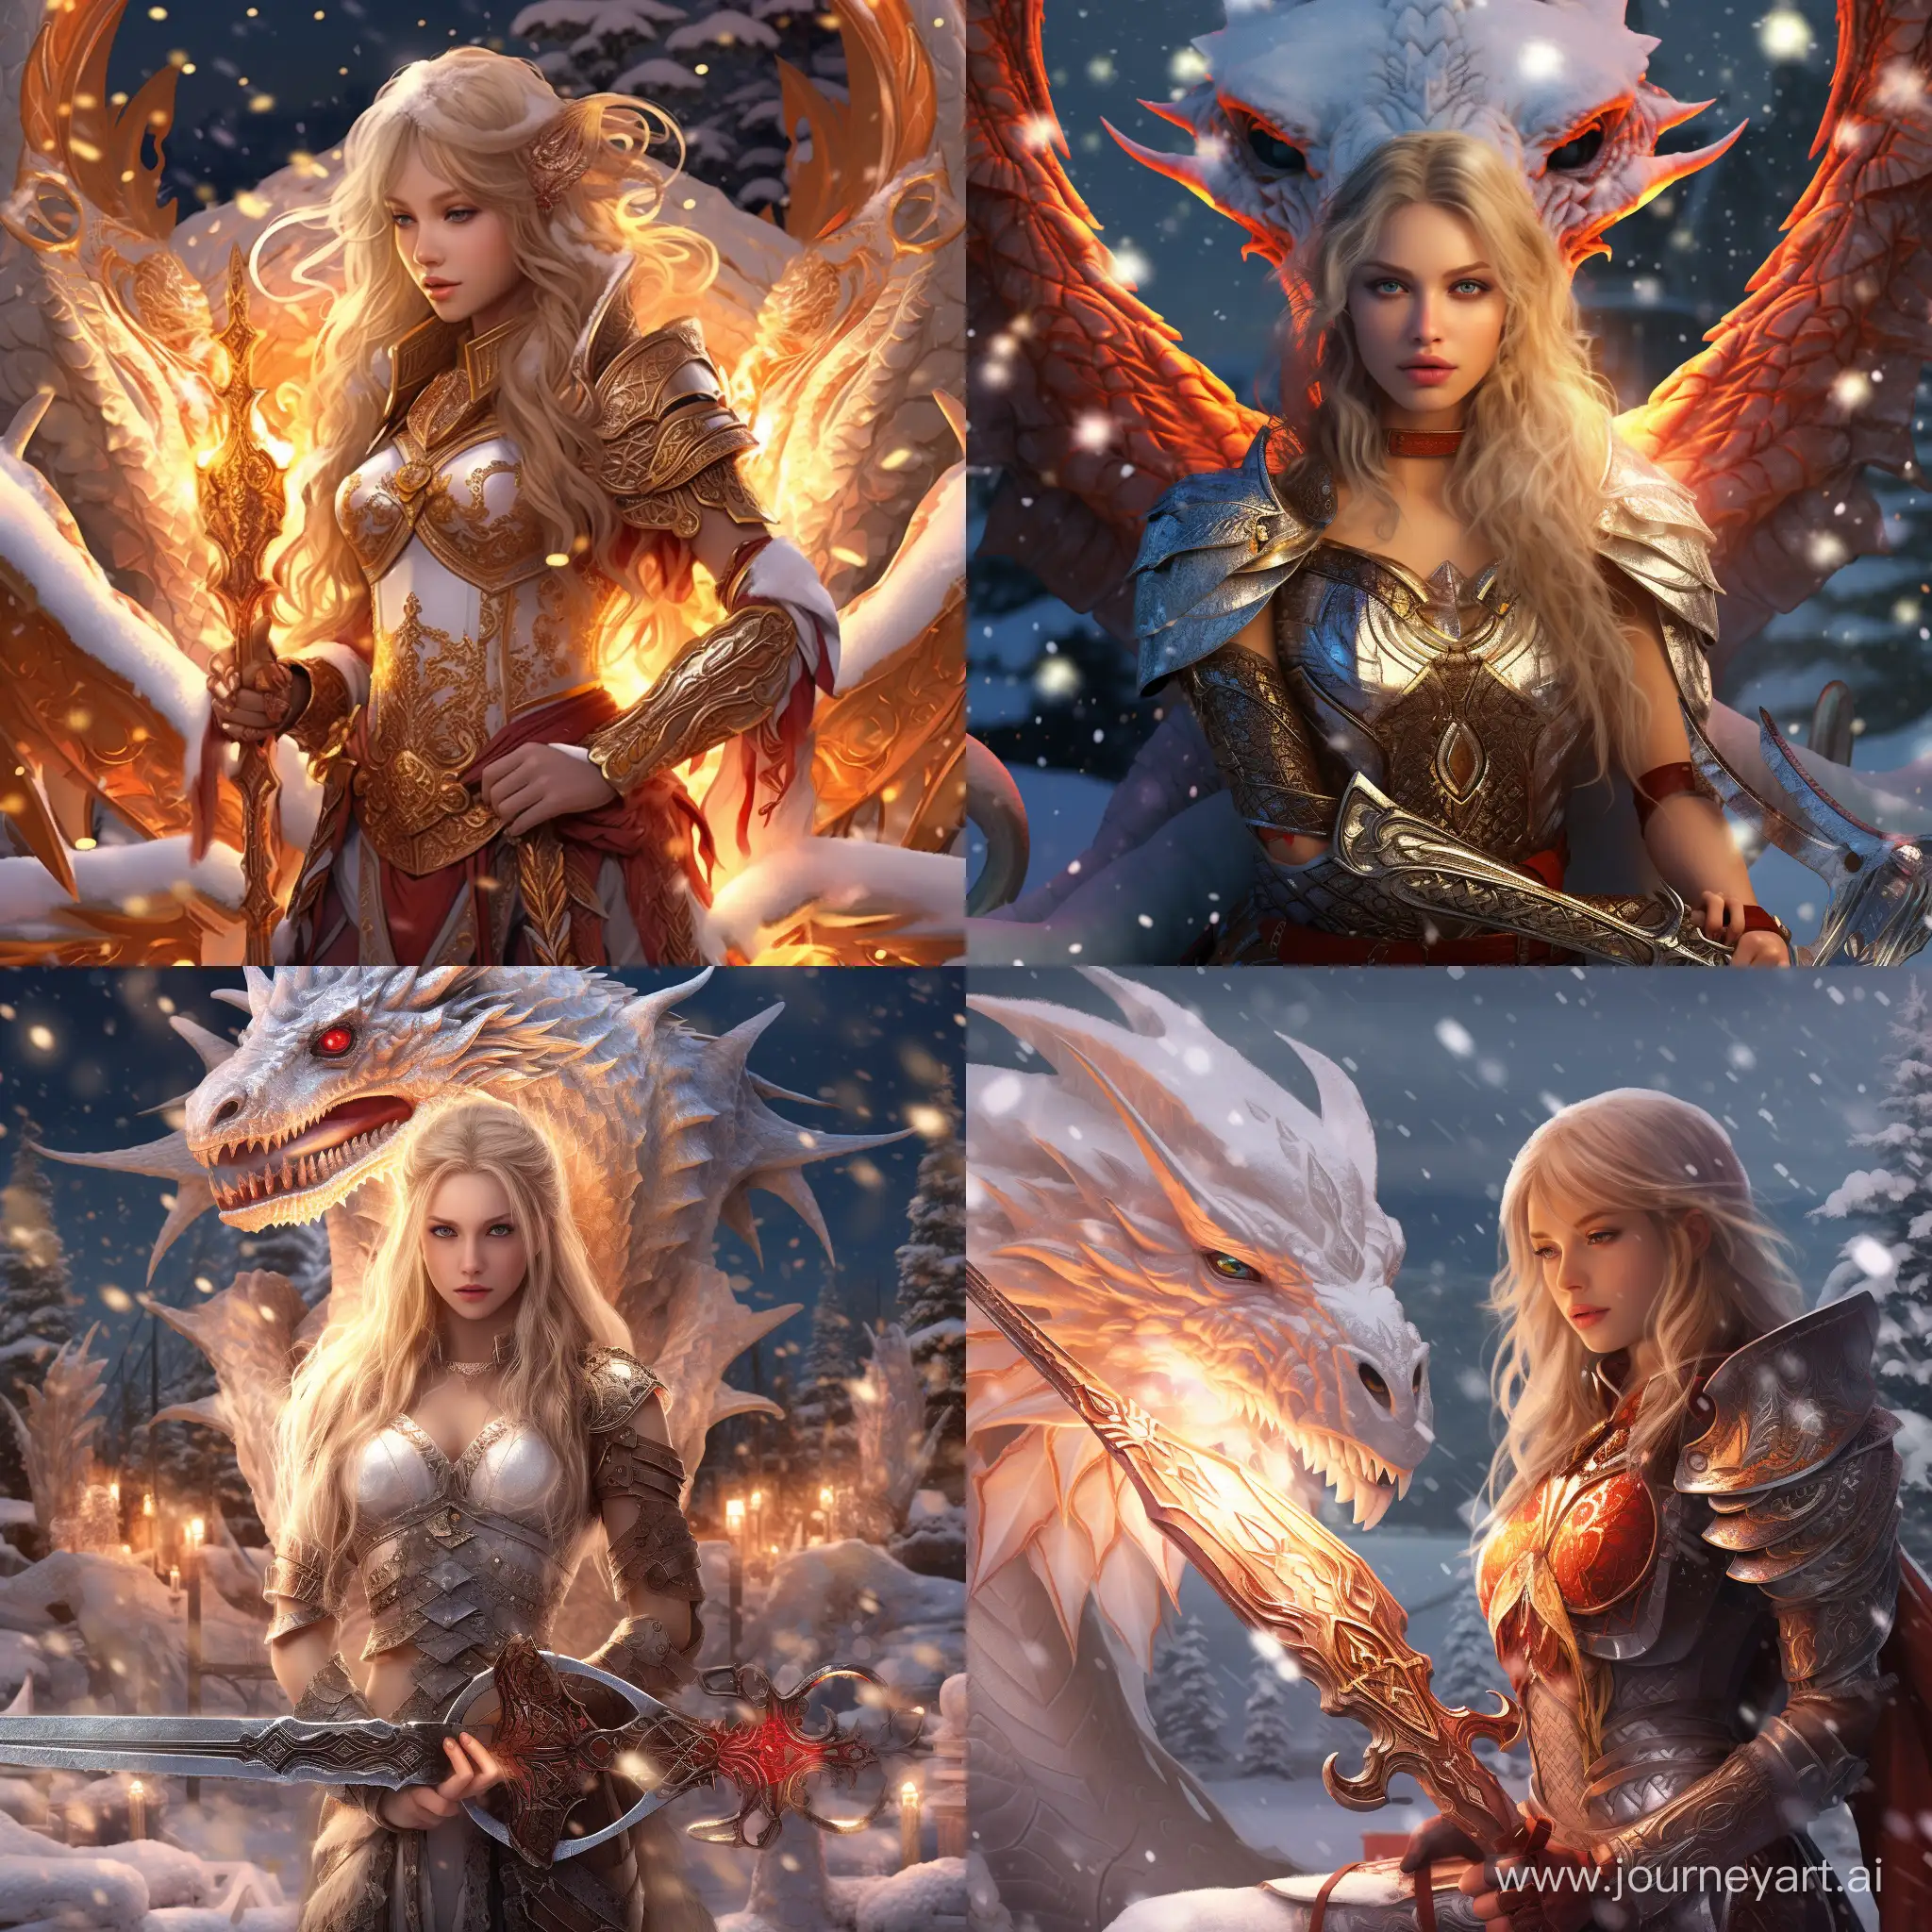 Dragon girl with scales reflecting the soft glow of Christmas lights, standing in a snowy landscape, sword planted firmly beside her, intricate gears visible on the hilt, soft snowflakes falling, warm fire emanating from her open palms as a contrast to the surrounding chill, digital painting, vivid colors, dramatic lighting, ultra detailed.